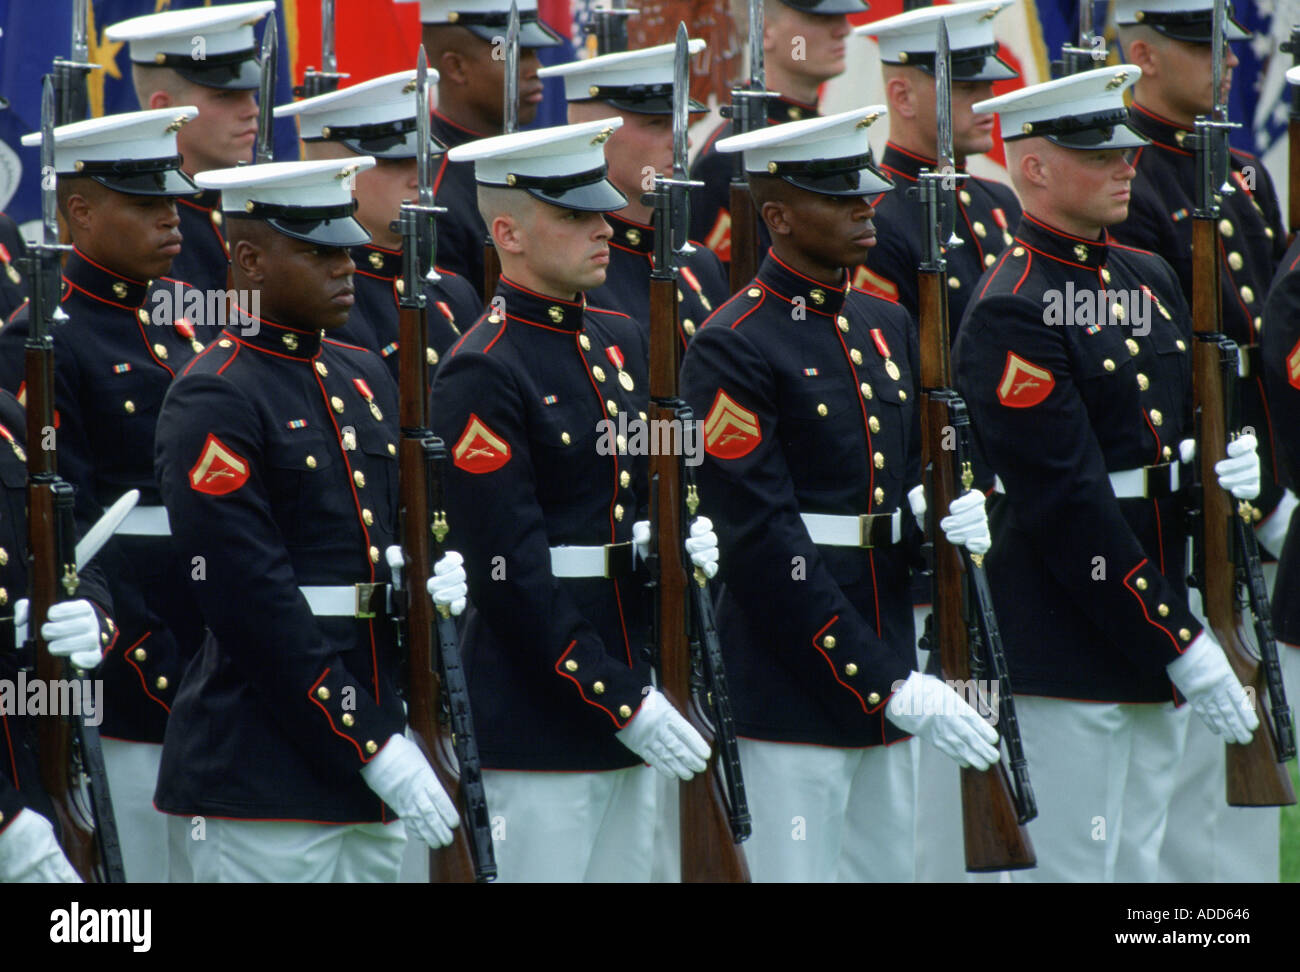 United States Military Guard of Honour with rifles parade on the White House Lawn Washington USA Stock Photo